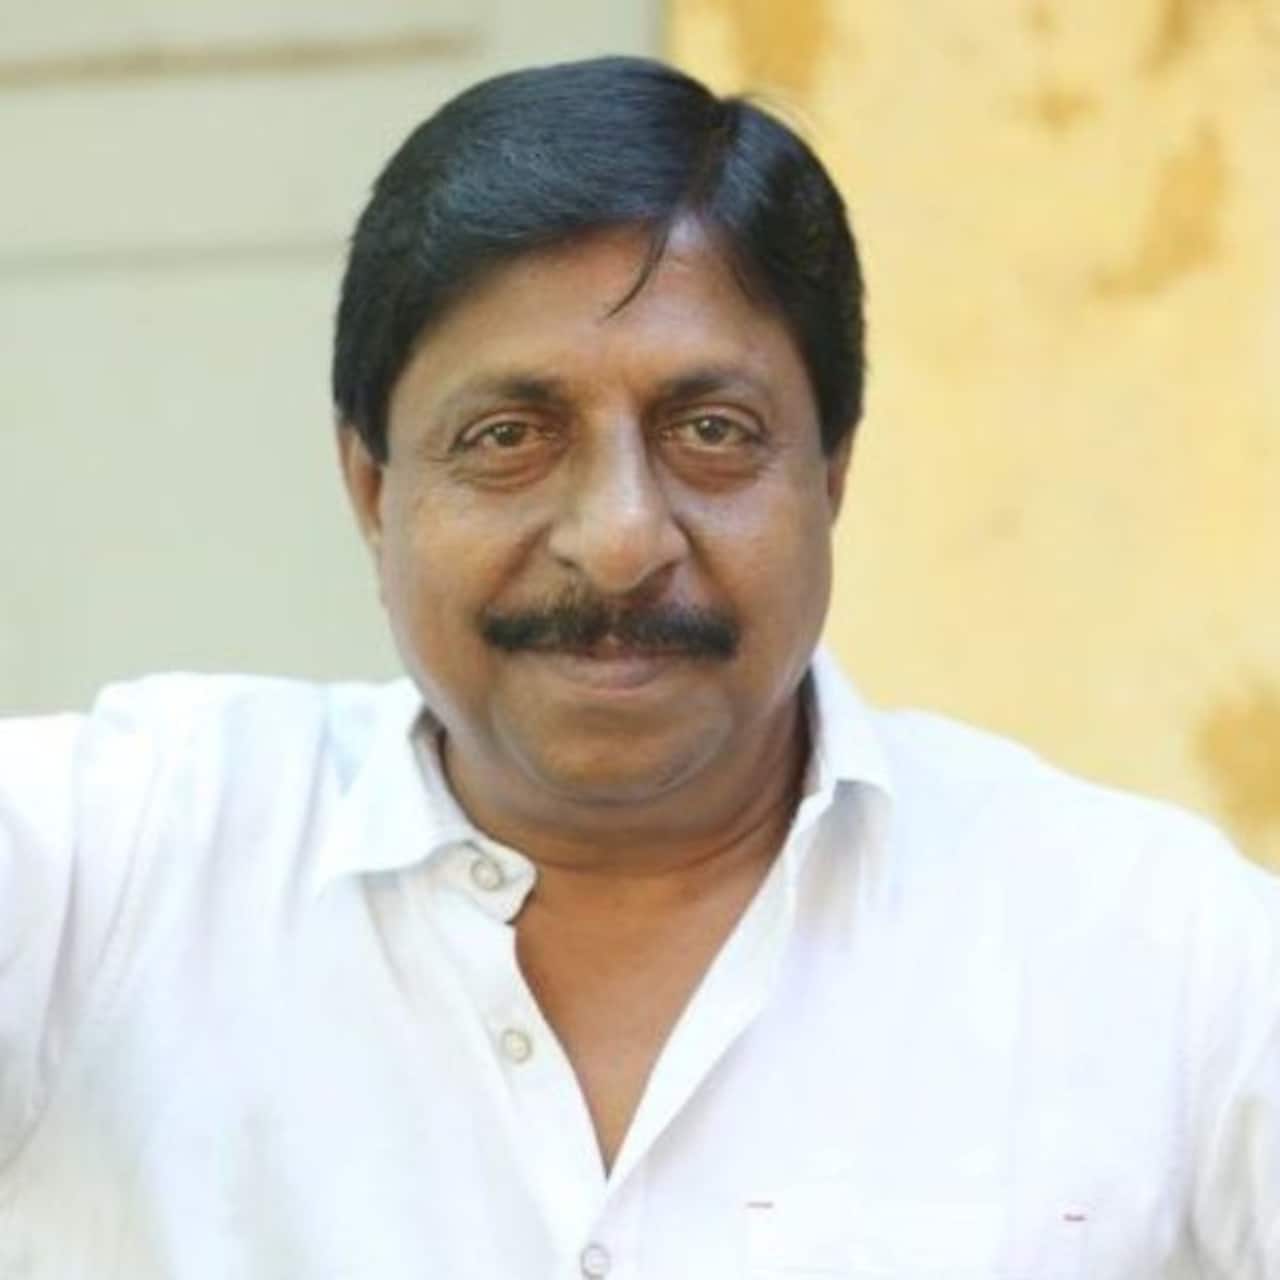 Malayalam actor-director Sreenivasan's condition is stable after being taken off ventilator